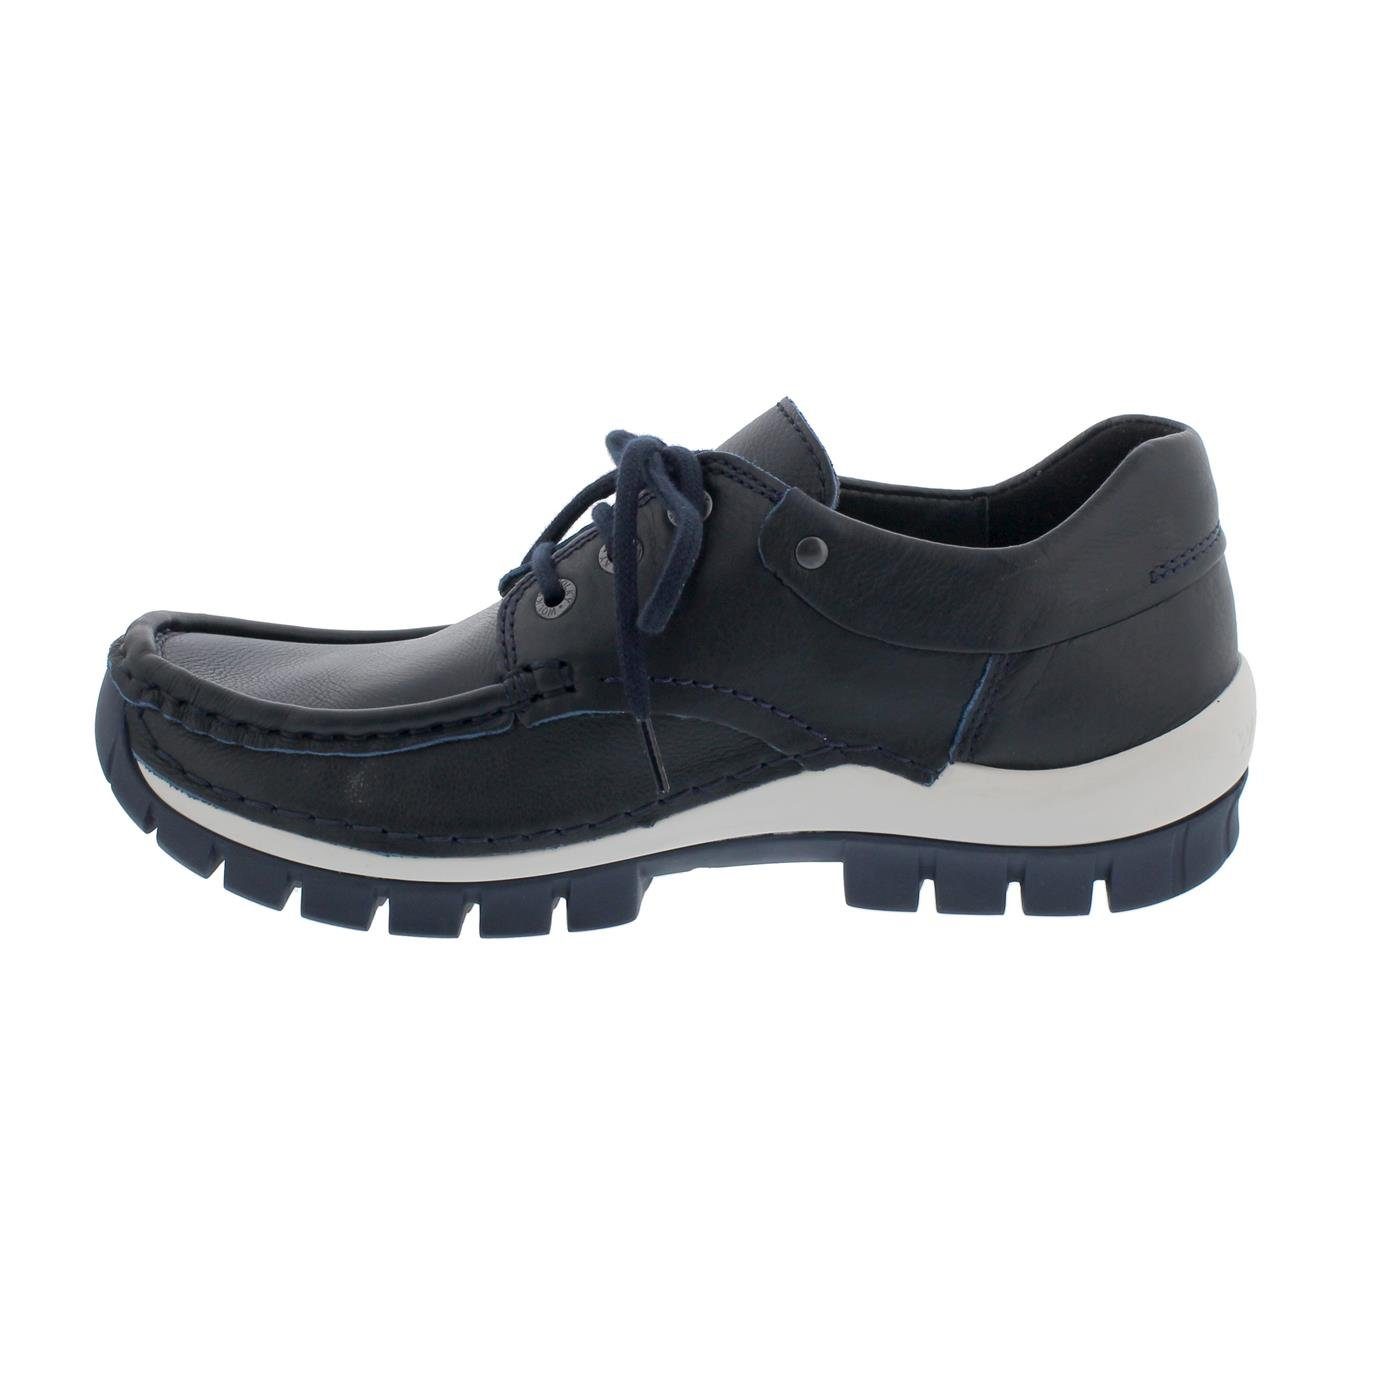 Nappa FLY Blue, Leather, WINTER 0472624-800 Schnürschuh WOLKY Halbschuh,